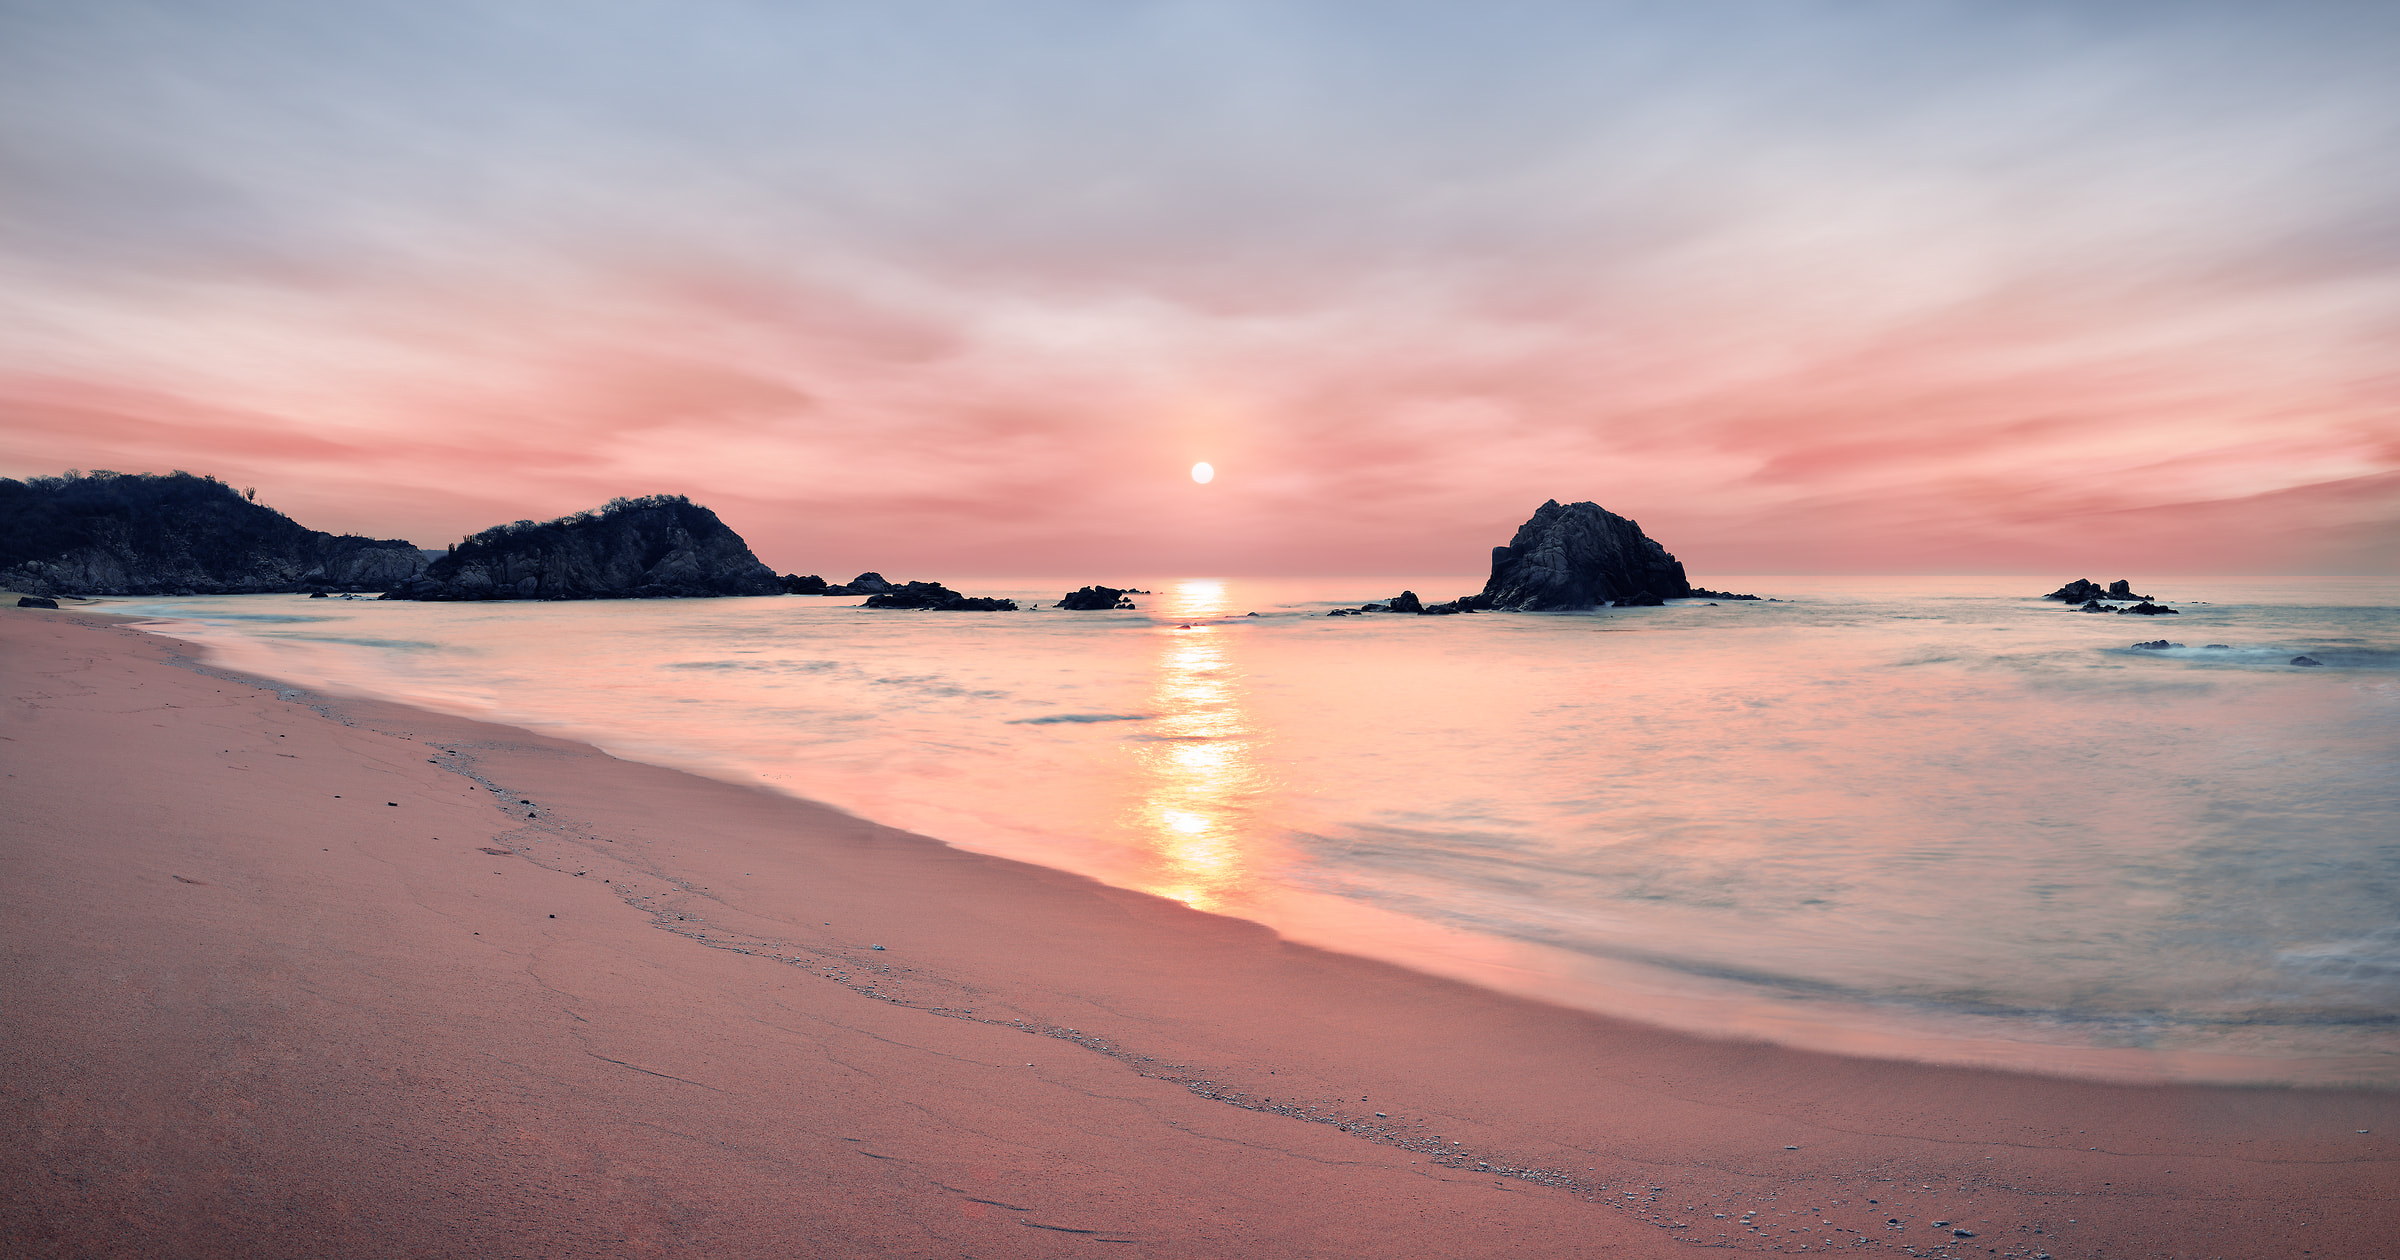 434 megapixels! A very high resolution, large-format VAST photo print of sunrise on a beach; landscape photograph created by Scott Dimond in Huatulco, Oaxaca, Mexico